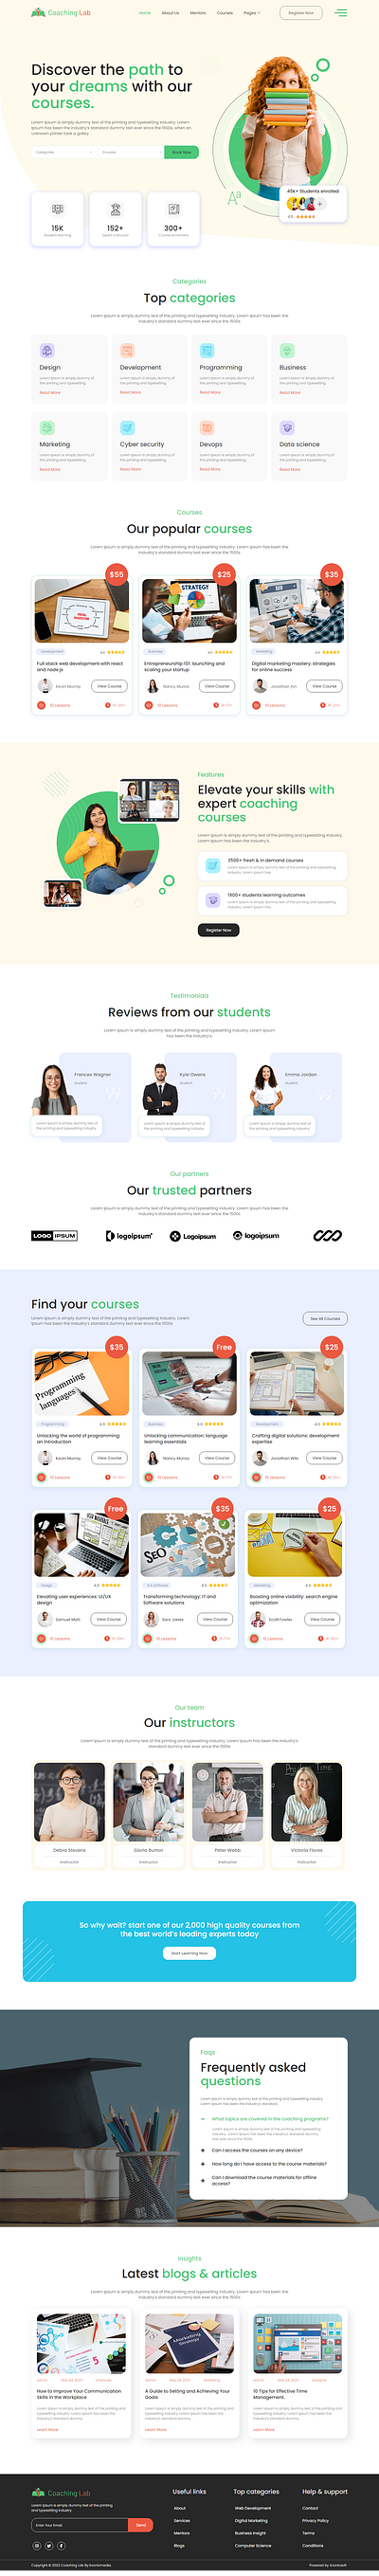 Coaching Lab - Coaching Center Elementor Template Kit branding consulting design design idea graphic design health and beauty instrucor life style mentor personal development success training training center ui ux website yoga